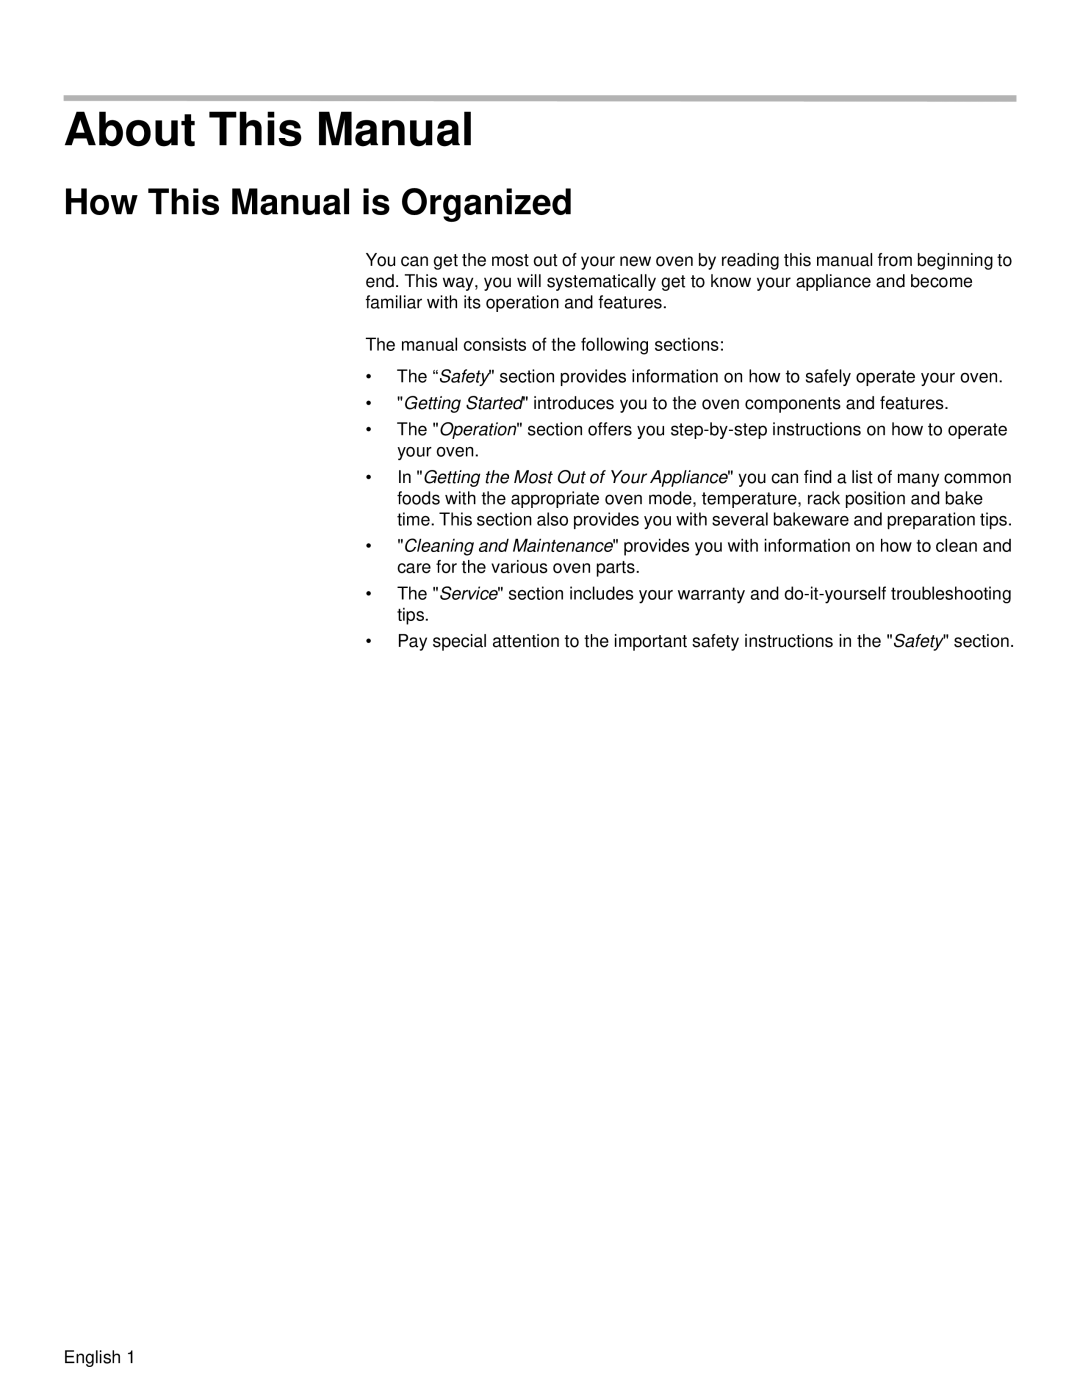 Siemens HB30D51UC, HB30S51UC manual About This Manual, How This Manual is Organized 